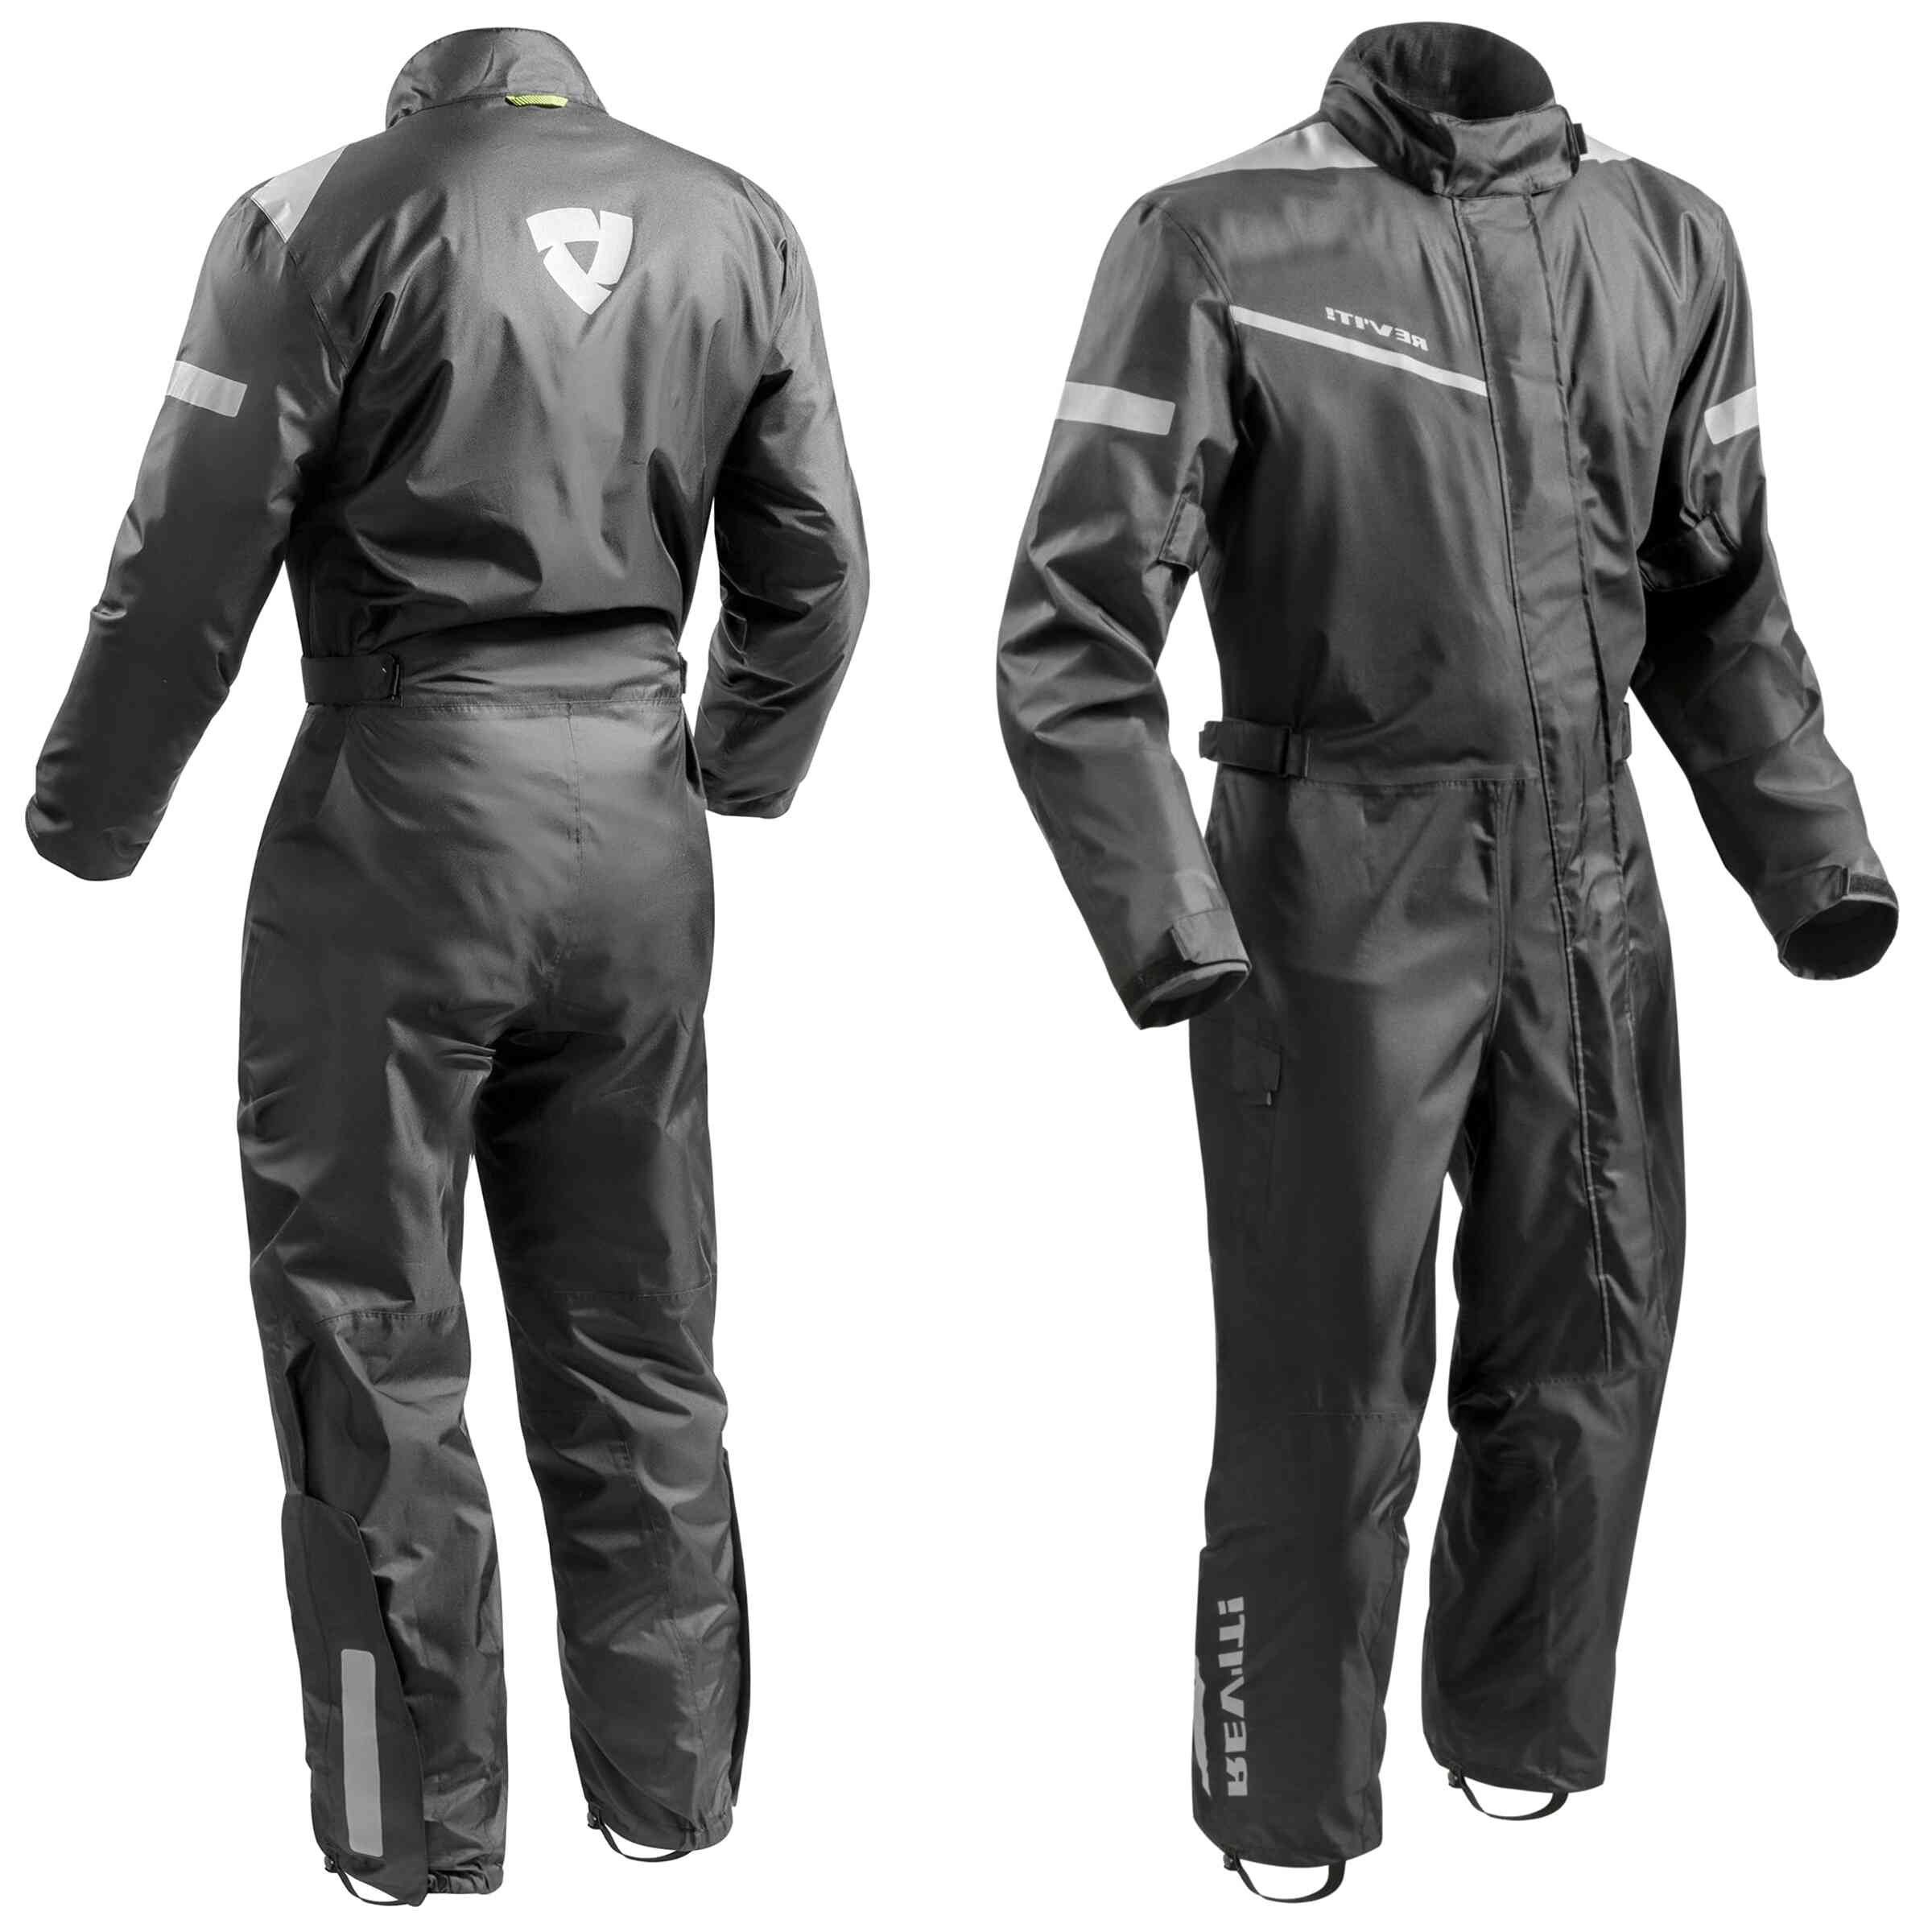 Motorcycle Rain Suit for sale in UK | 64 used Motorcycle Rain Suits